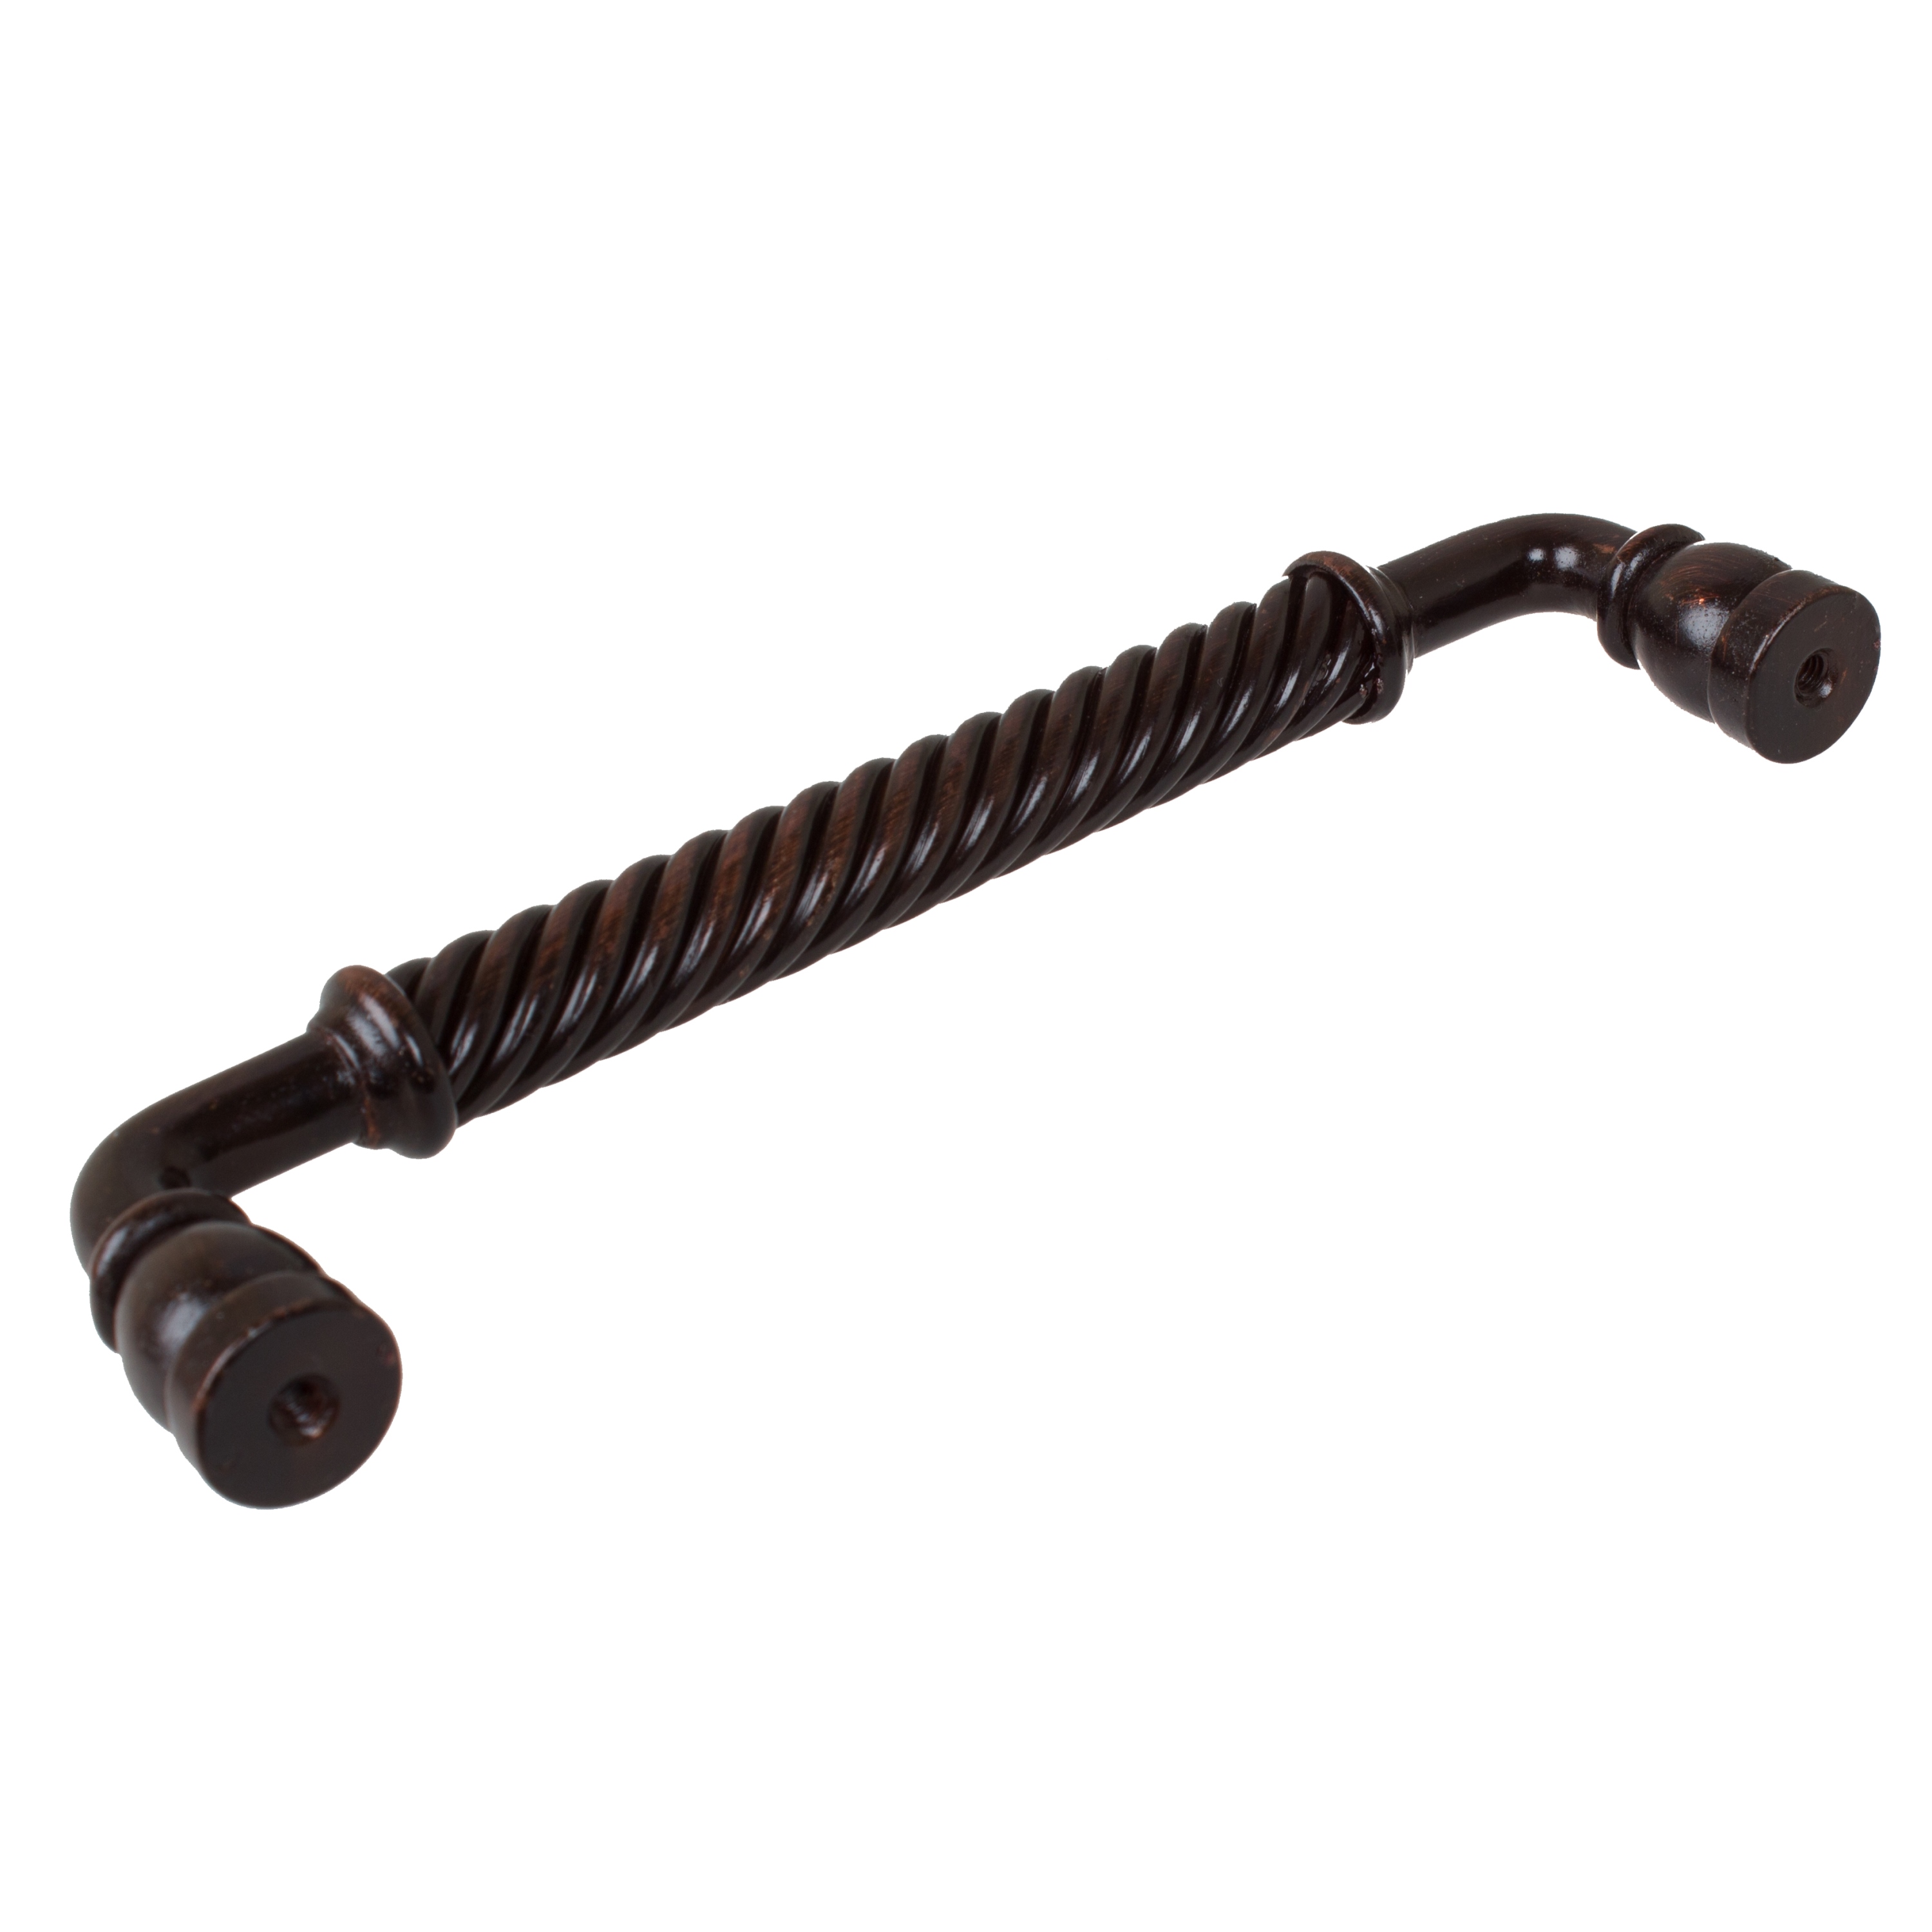 GlideRite 6-1/4 in. Center Rustic Bronze Twisted Cabinet Drawer Pull, Oil Rubbed Bronze - image 2 of 5